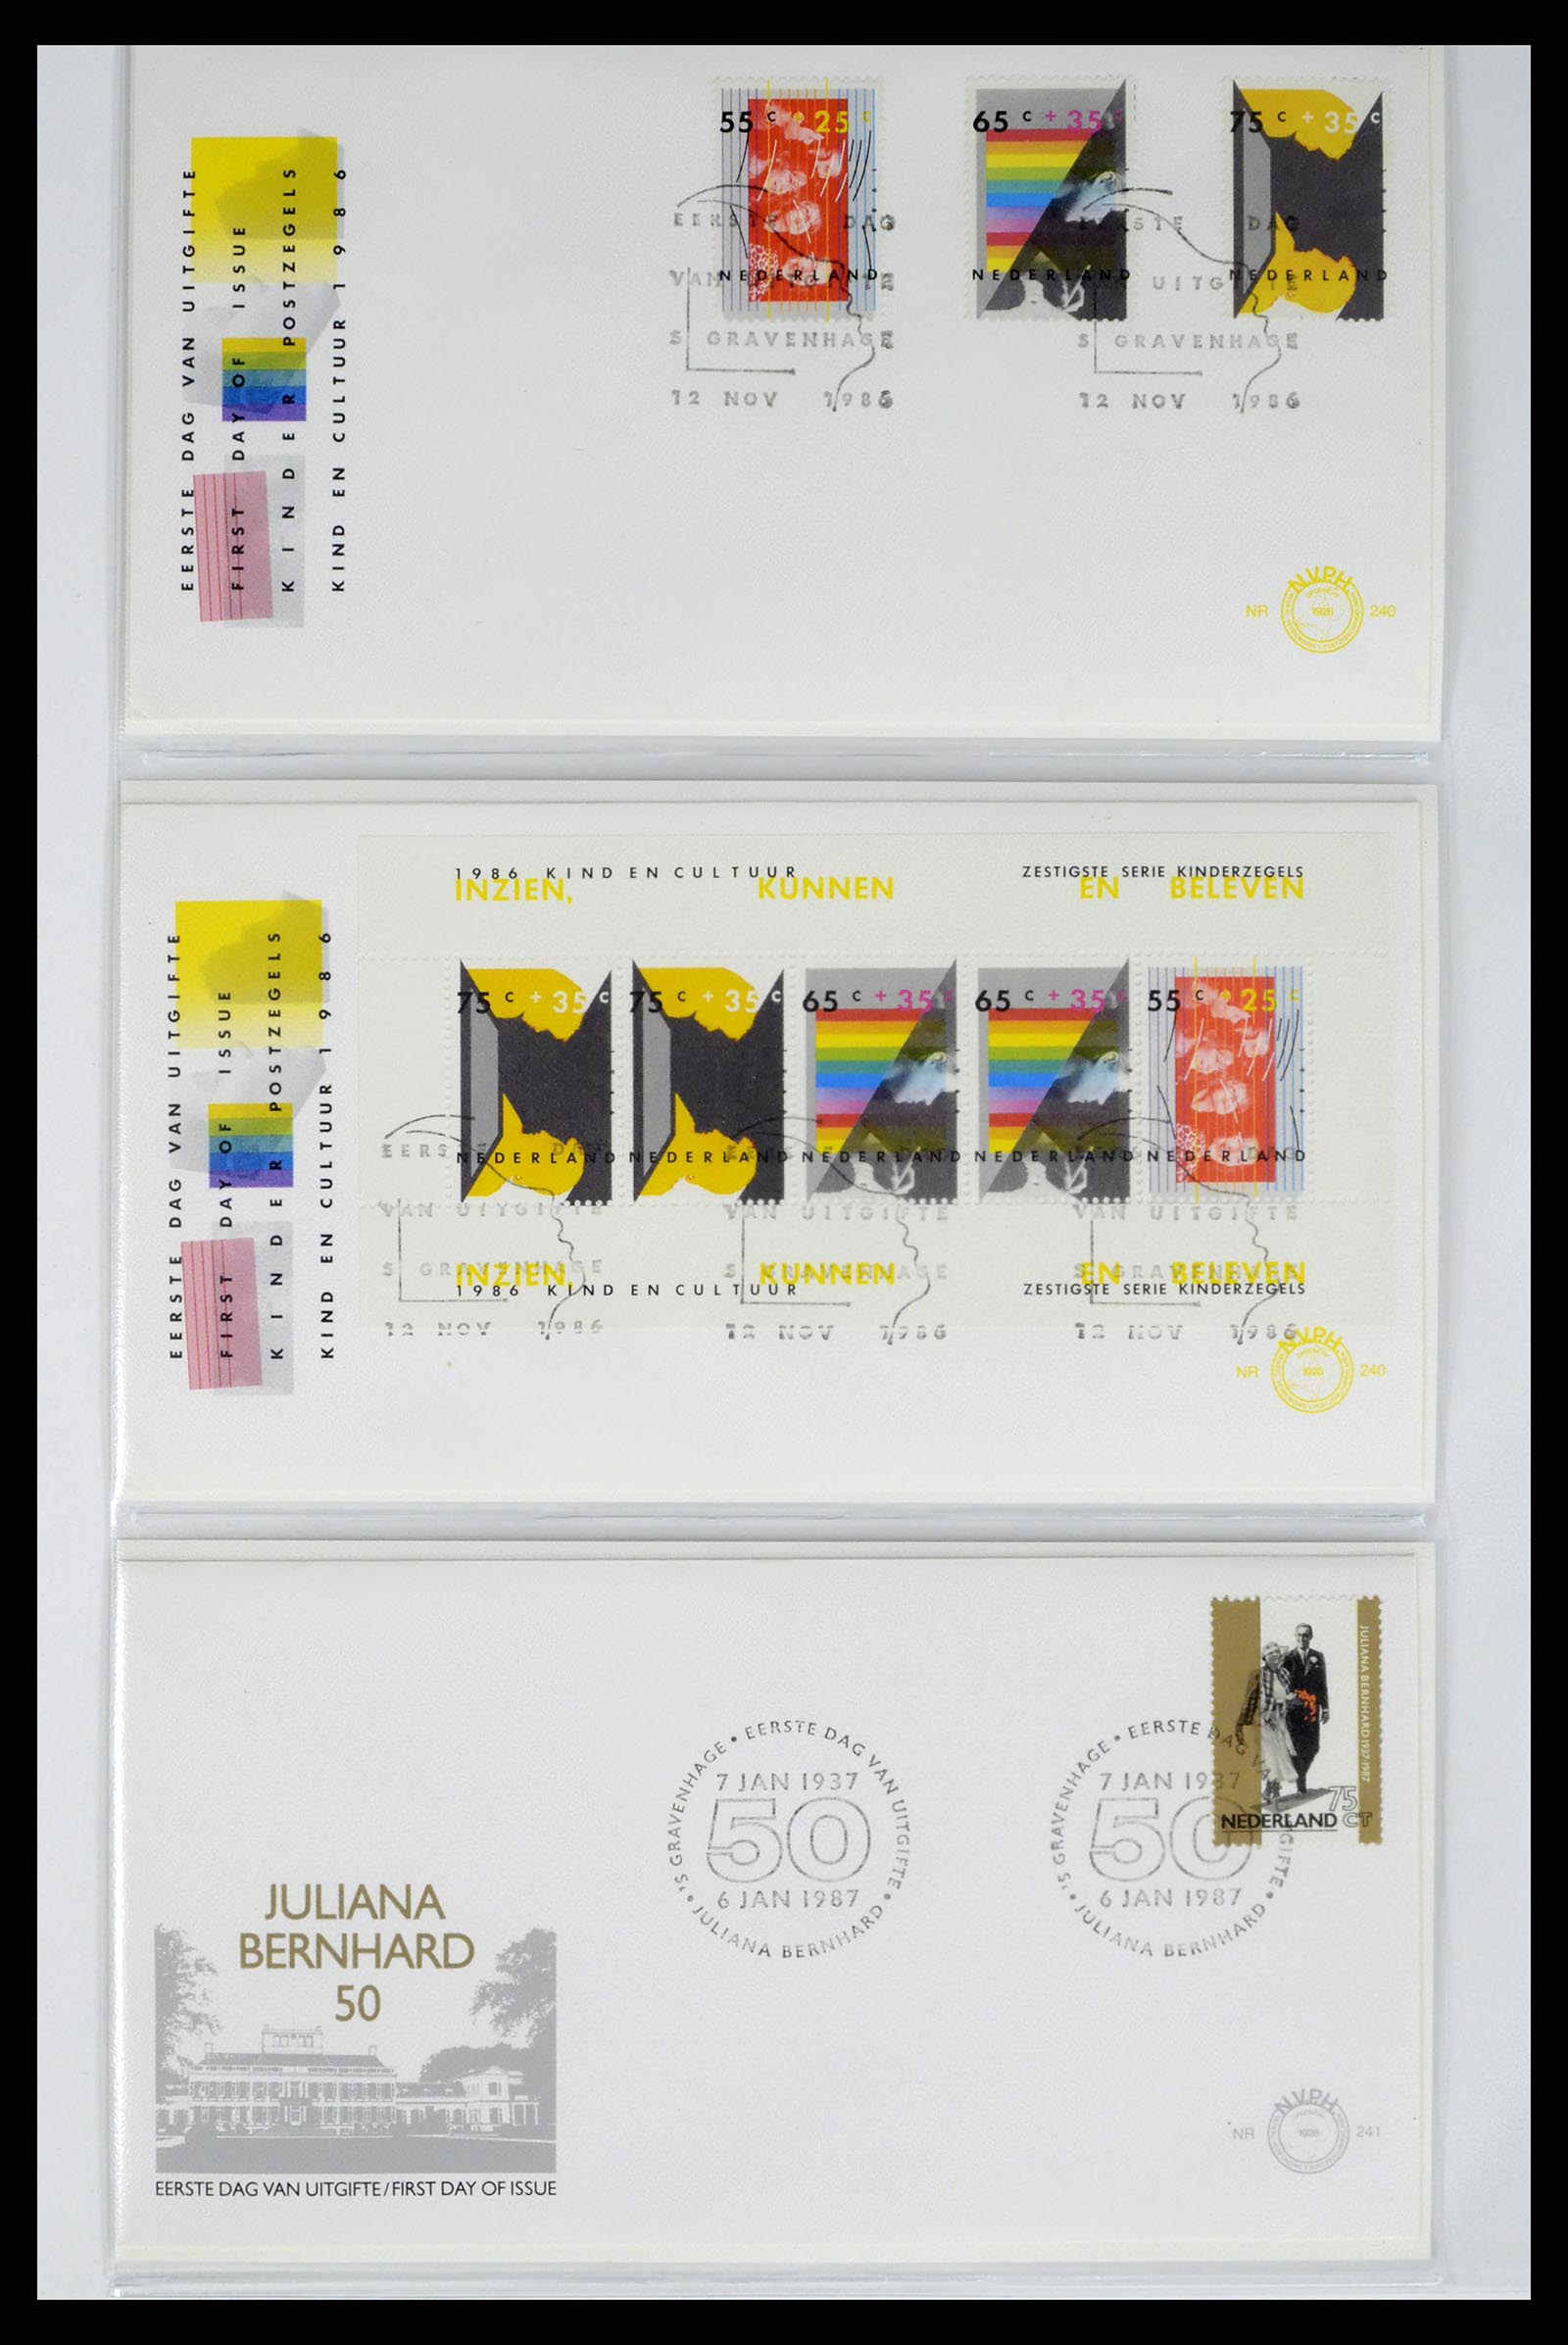 37983 081 - Stamp Collection 37983 Netherland FDC's 1954-1987.